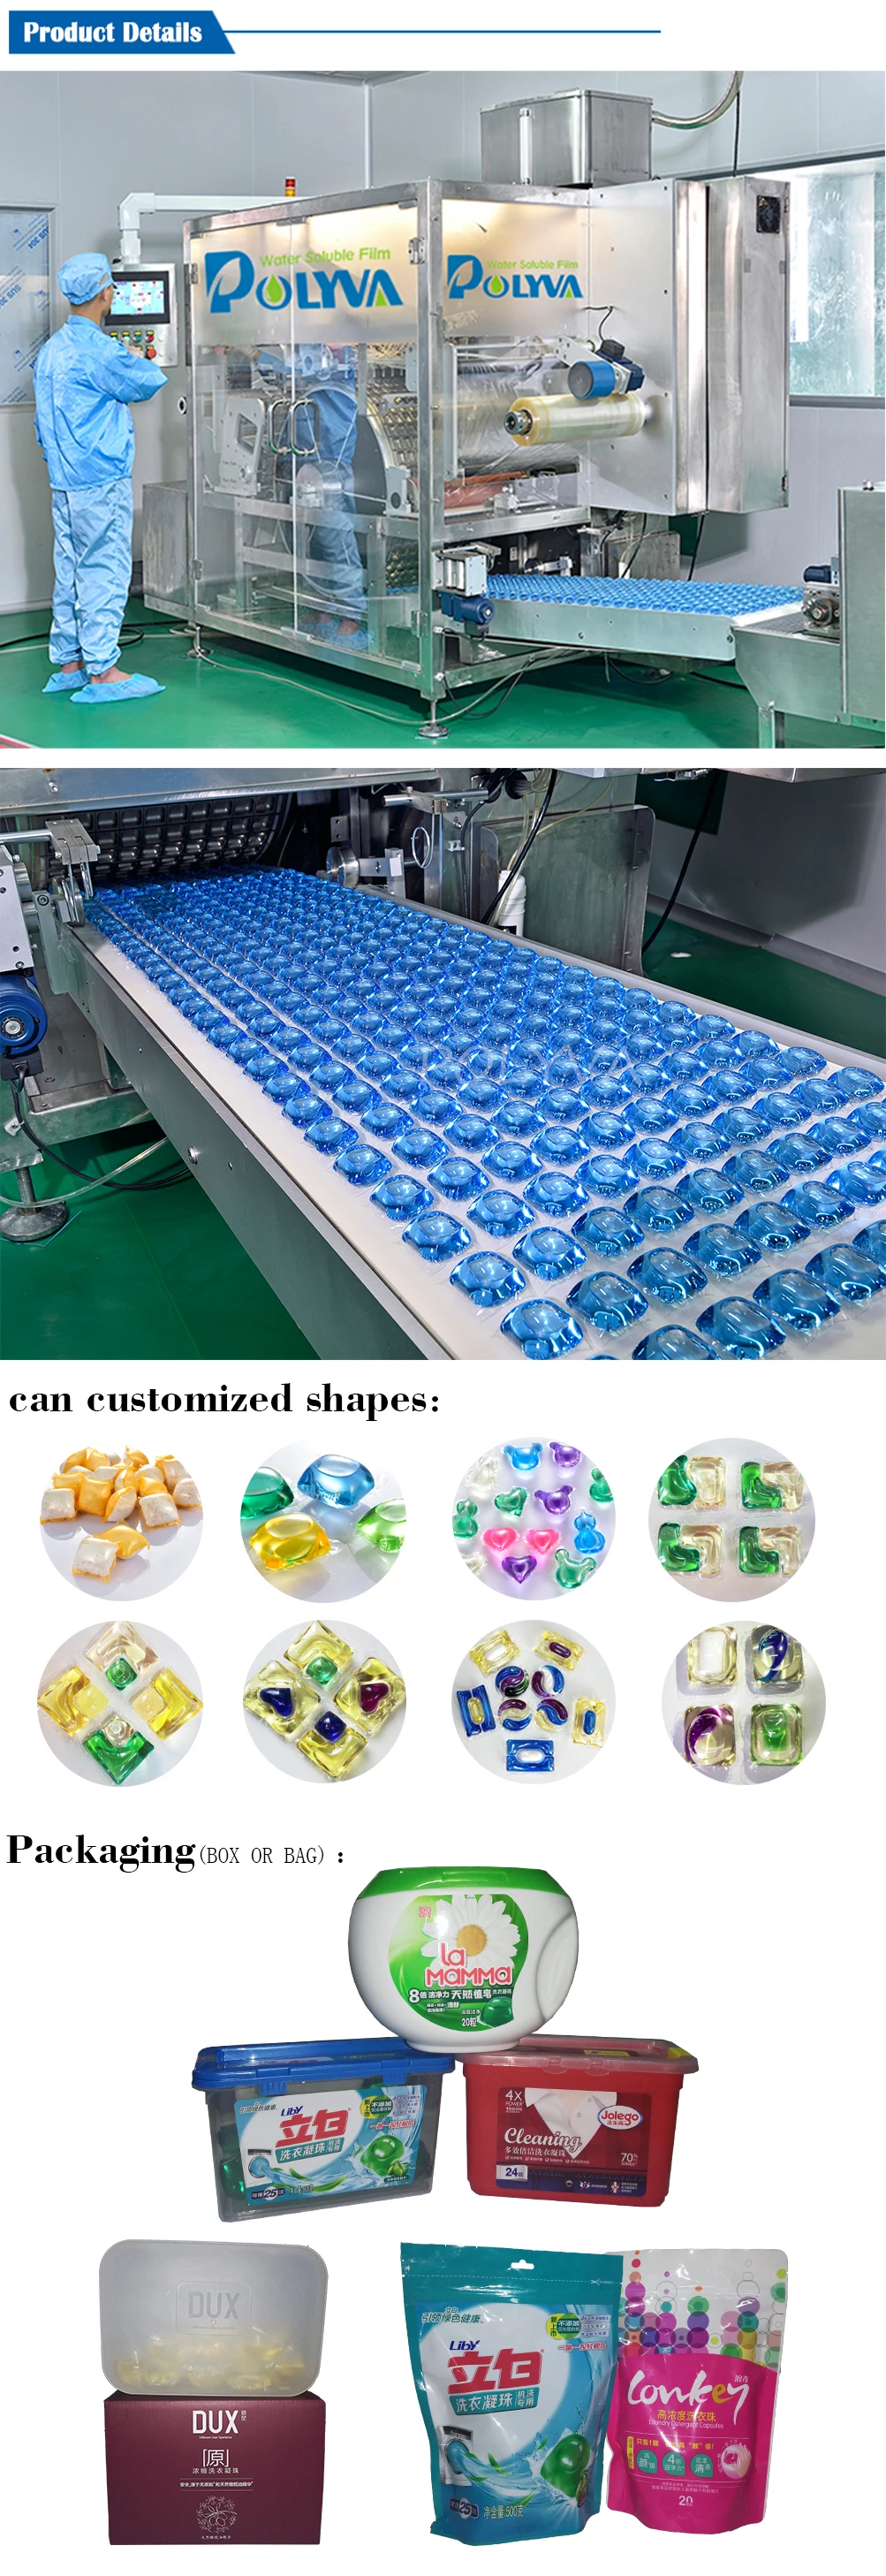 OEM 3in1 Cloth Washing Apparel Detergent Pods Liquid Laundry Soap Capsule